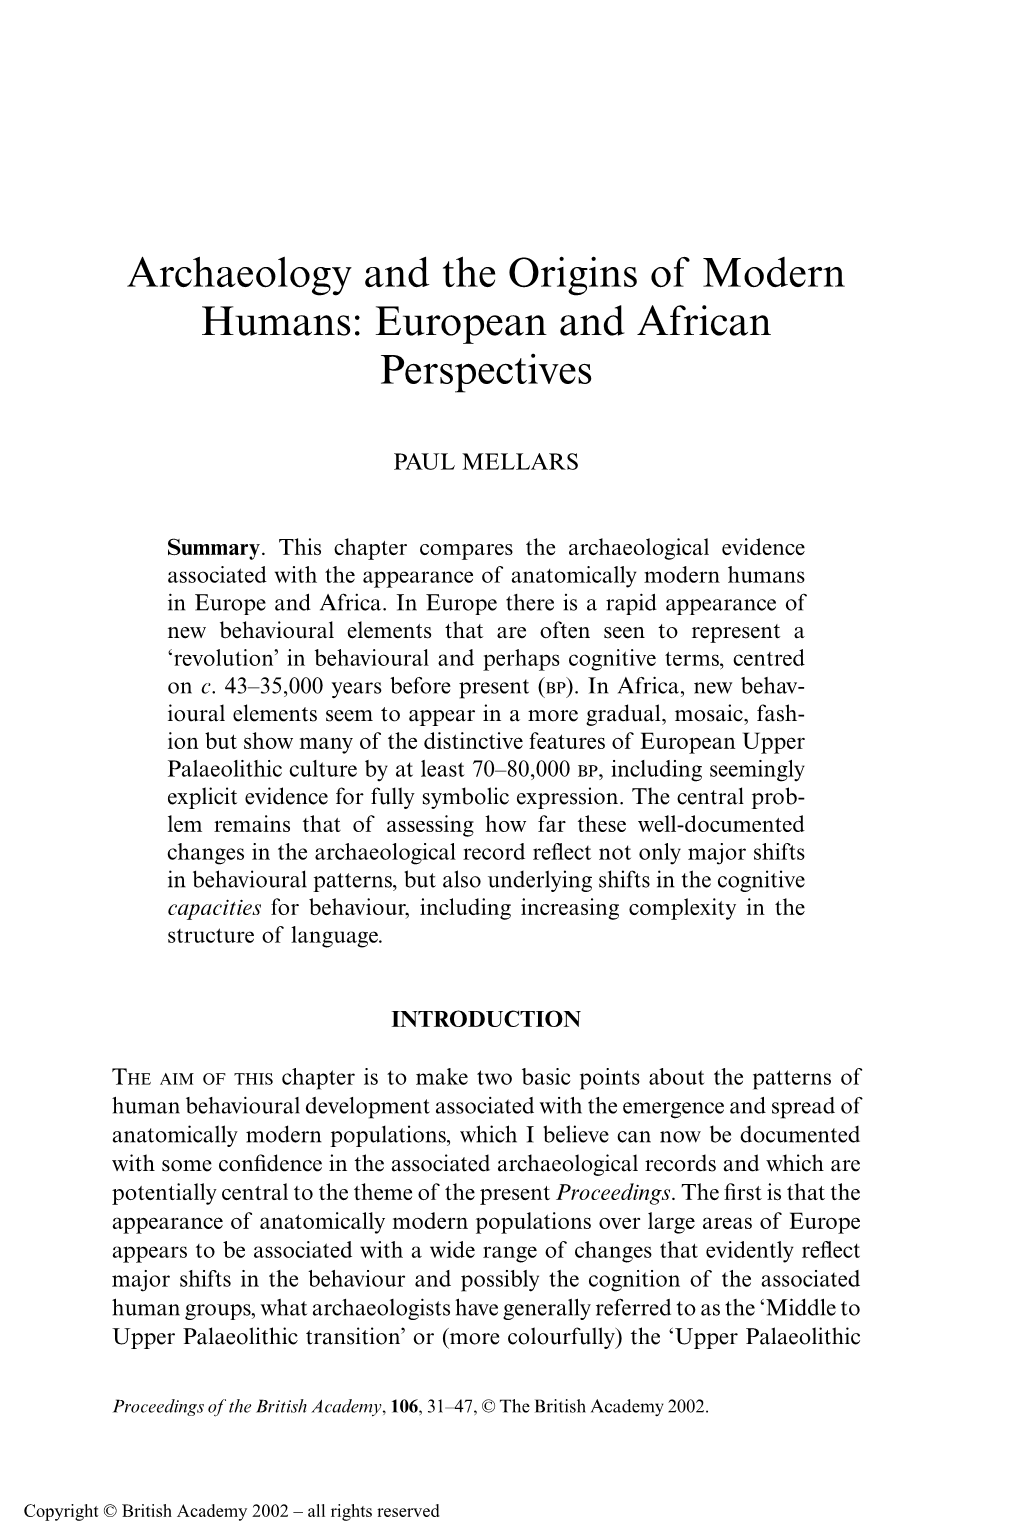 Archaeology and the Origins of Modern Humans: European and African Perspectives